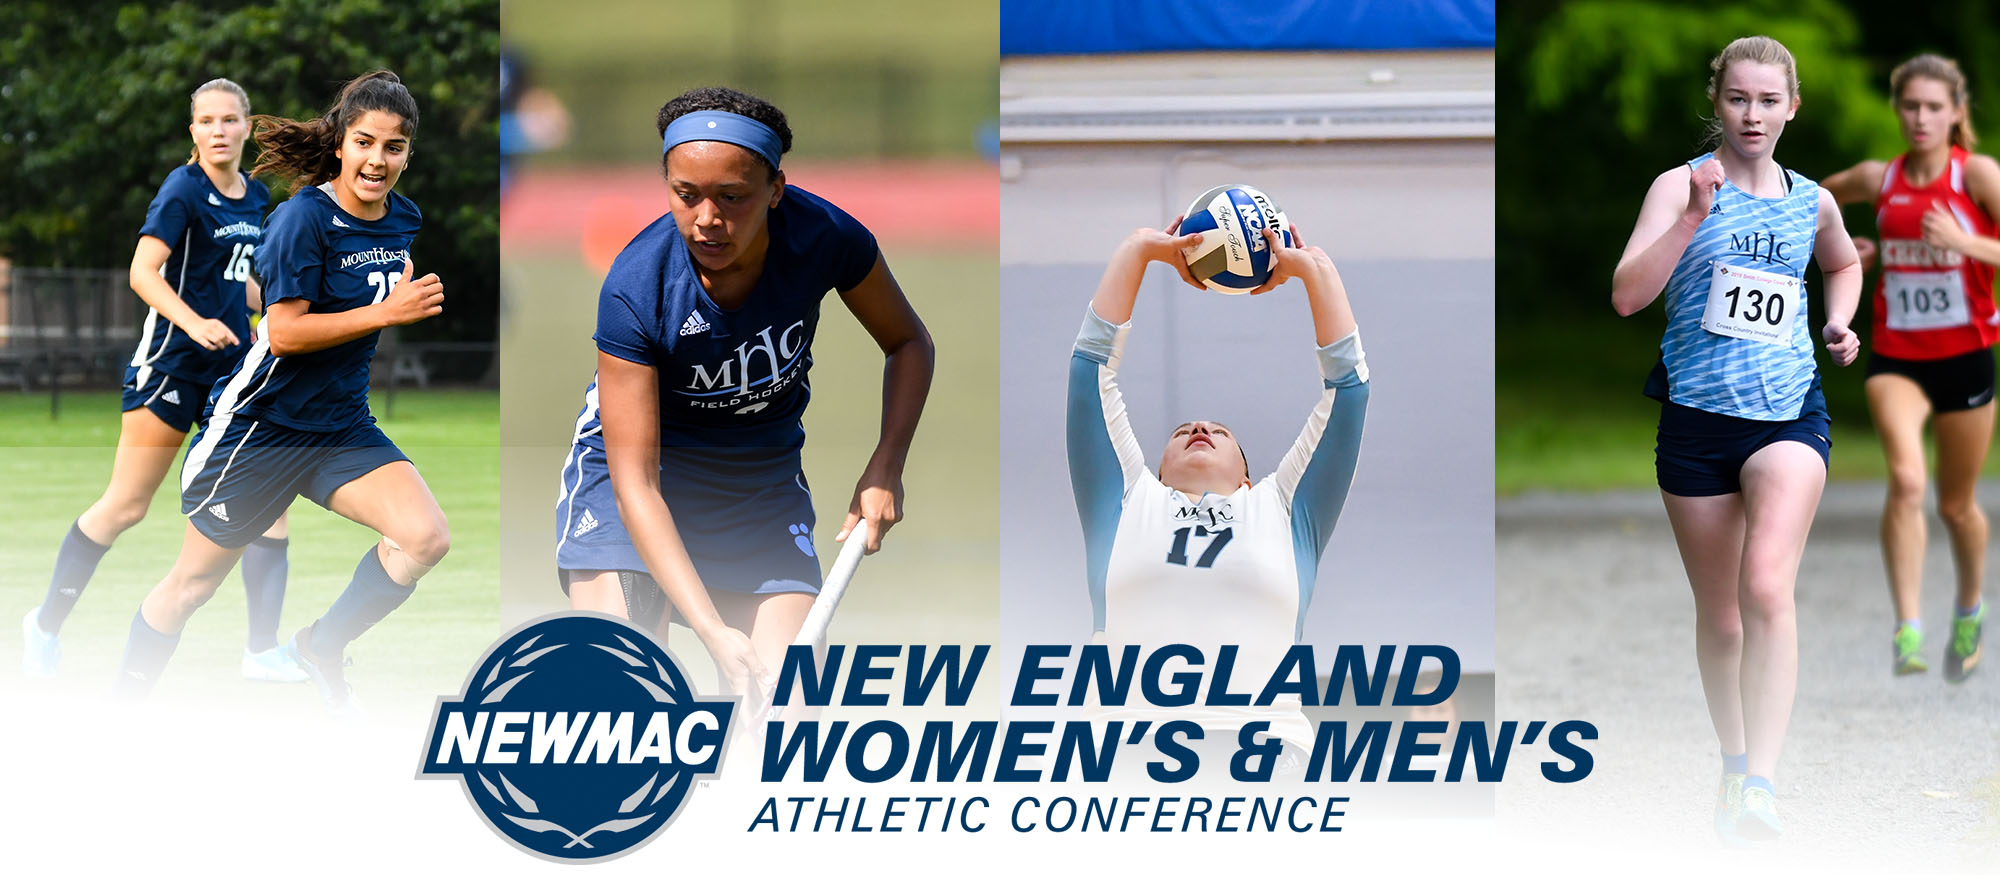 Four Mount Holyoke College Fall Student-Athletes Named to NEWMAC All-Sportsmanship Team